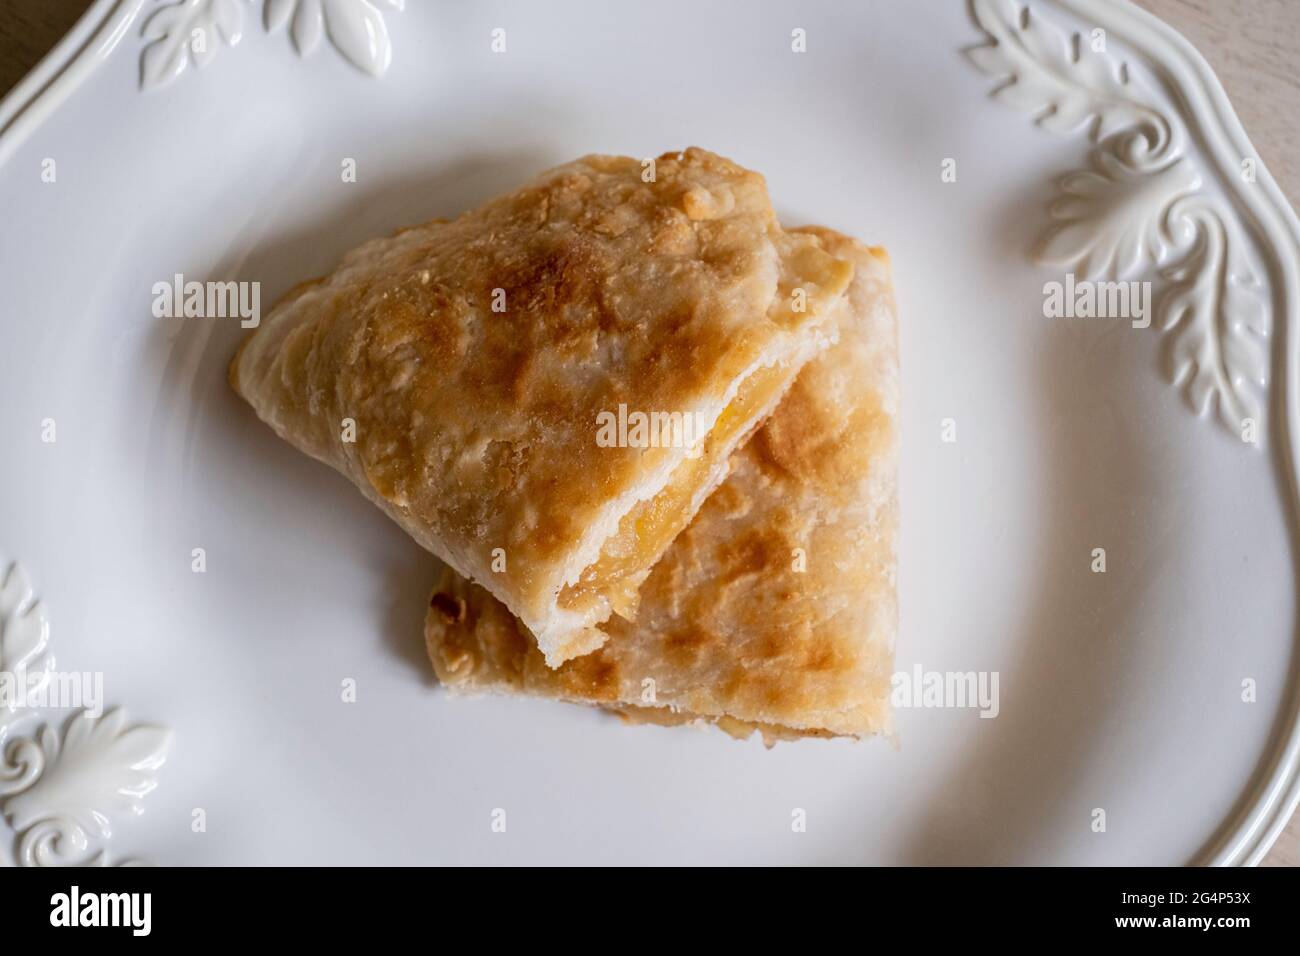 Homemade fried apple pie cut in half made from dried apples with flaky pie crust on a white plate. Stock Photo